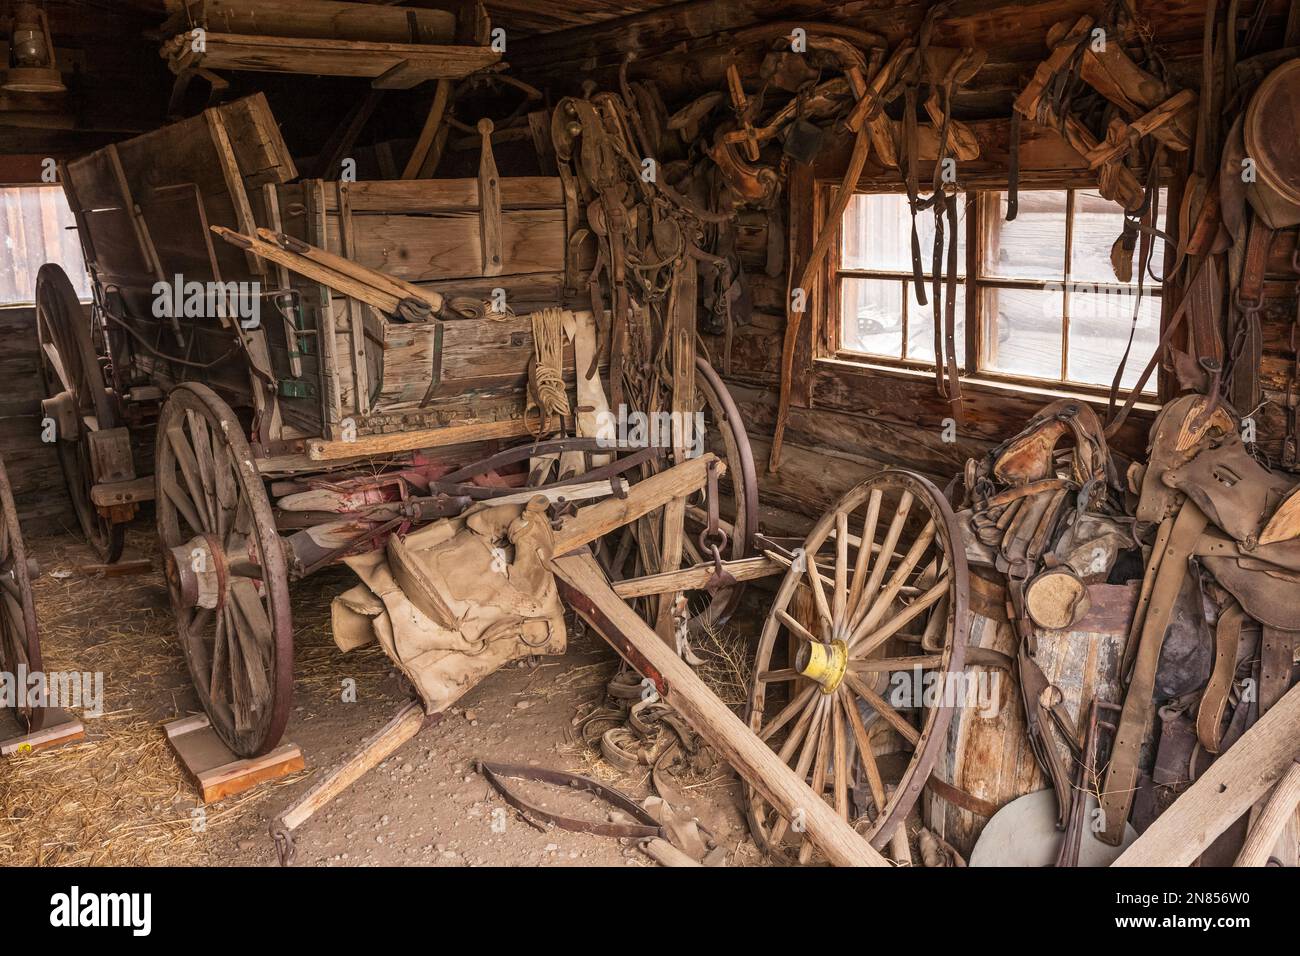 Cody, WY, USA - Jun 25, 2022: Old Trail Town is a tourist attraction with authentic frontier buildings from the late 1800's.  A garage with old wagon Stock Photo